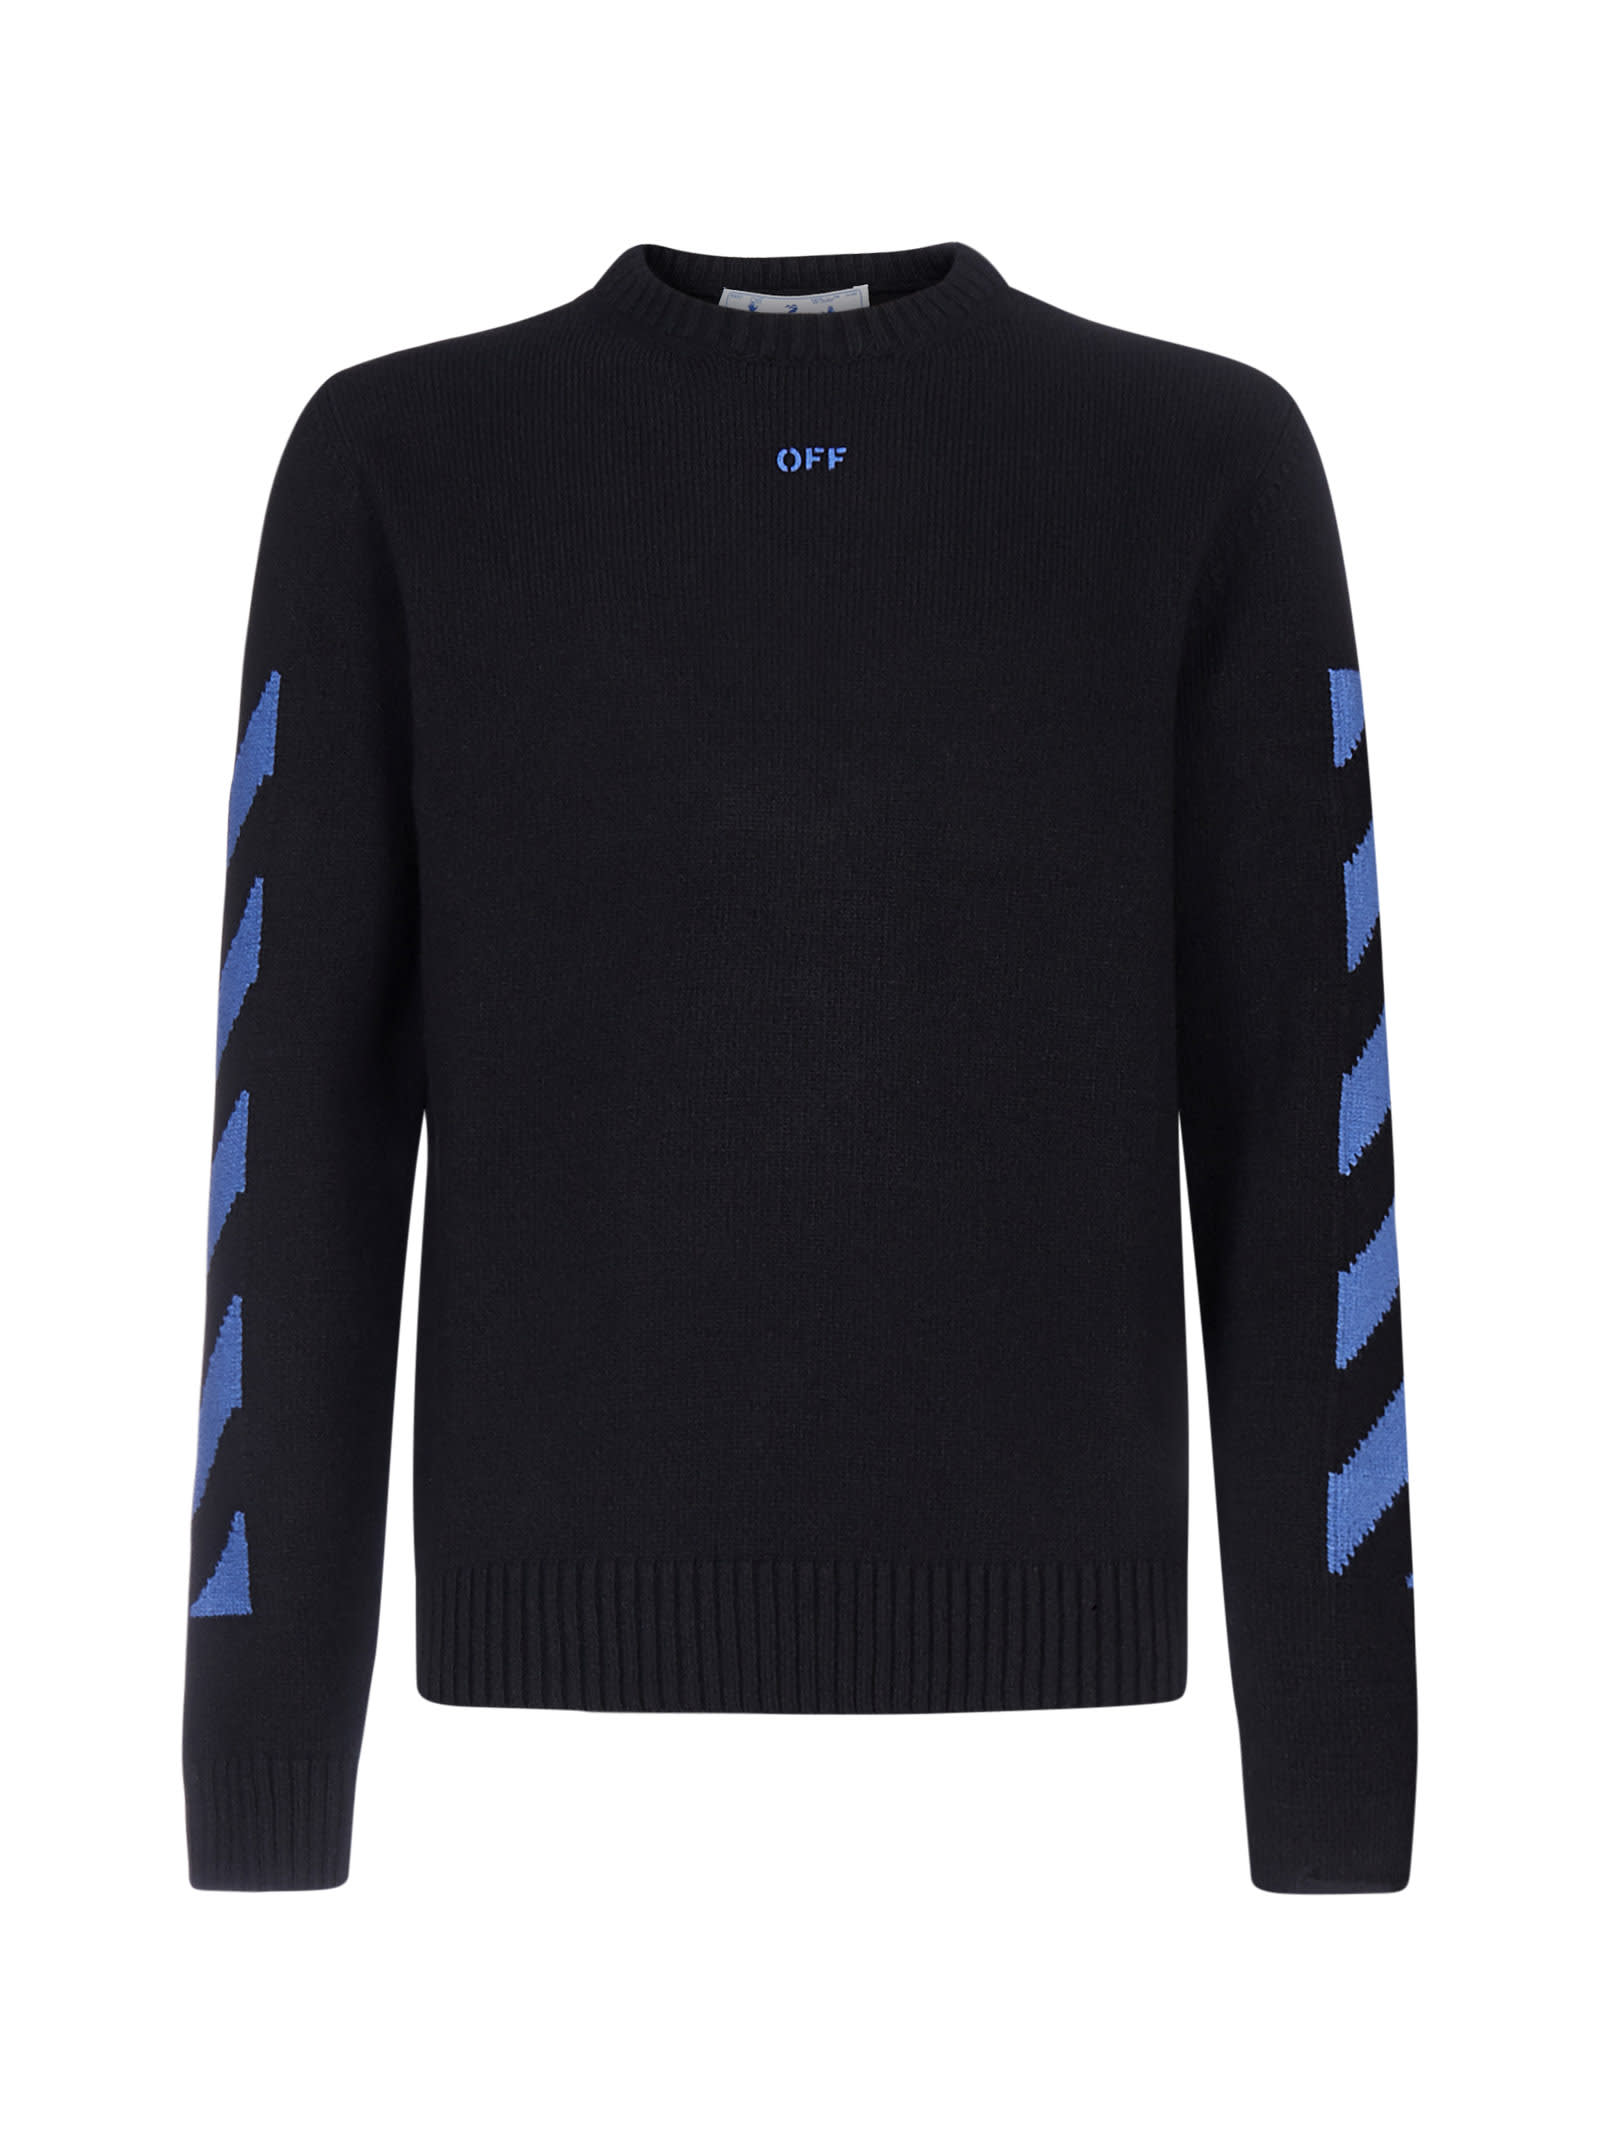 OFF-WHITE SWEATER,OMHE023S21KNI001 -1045